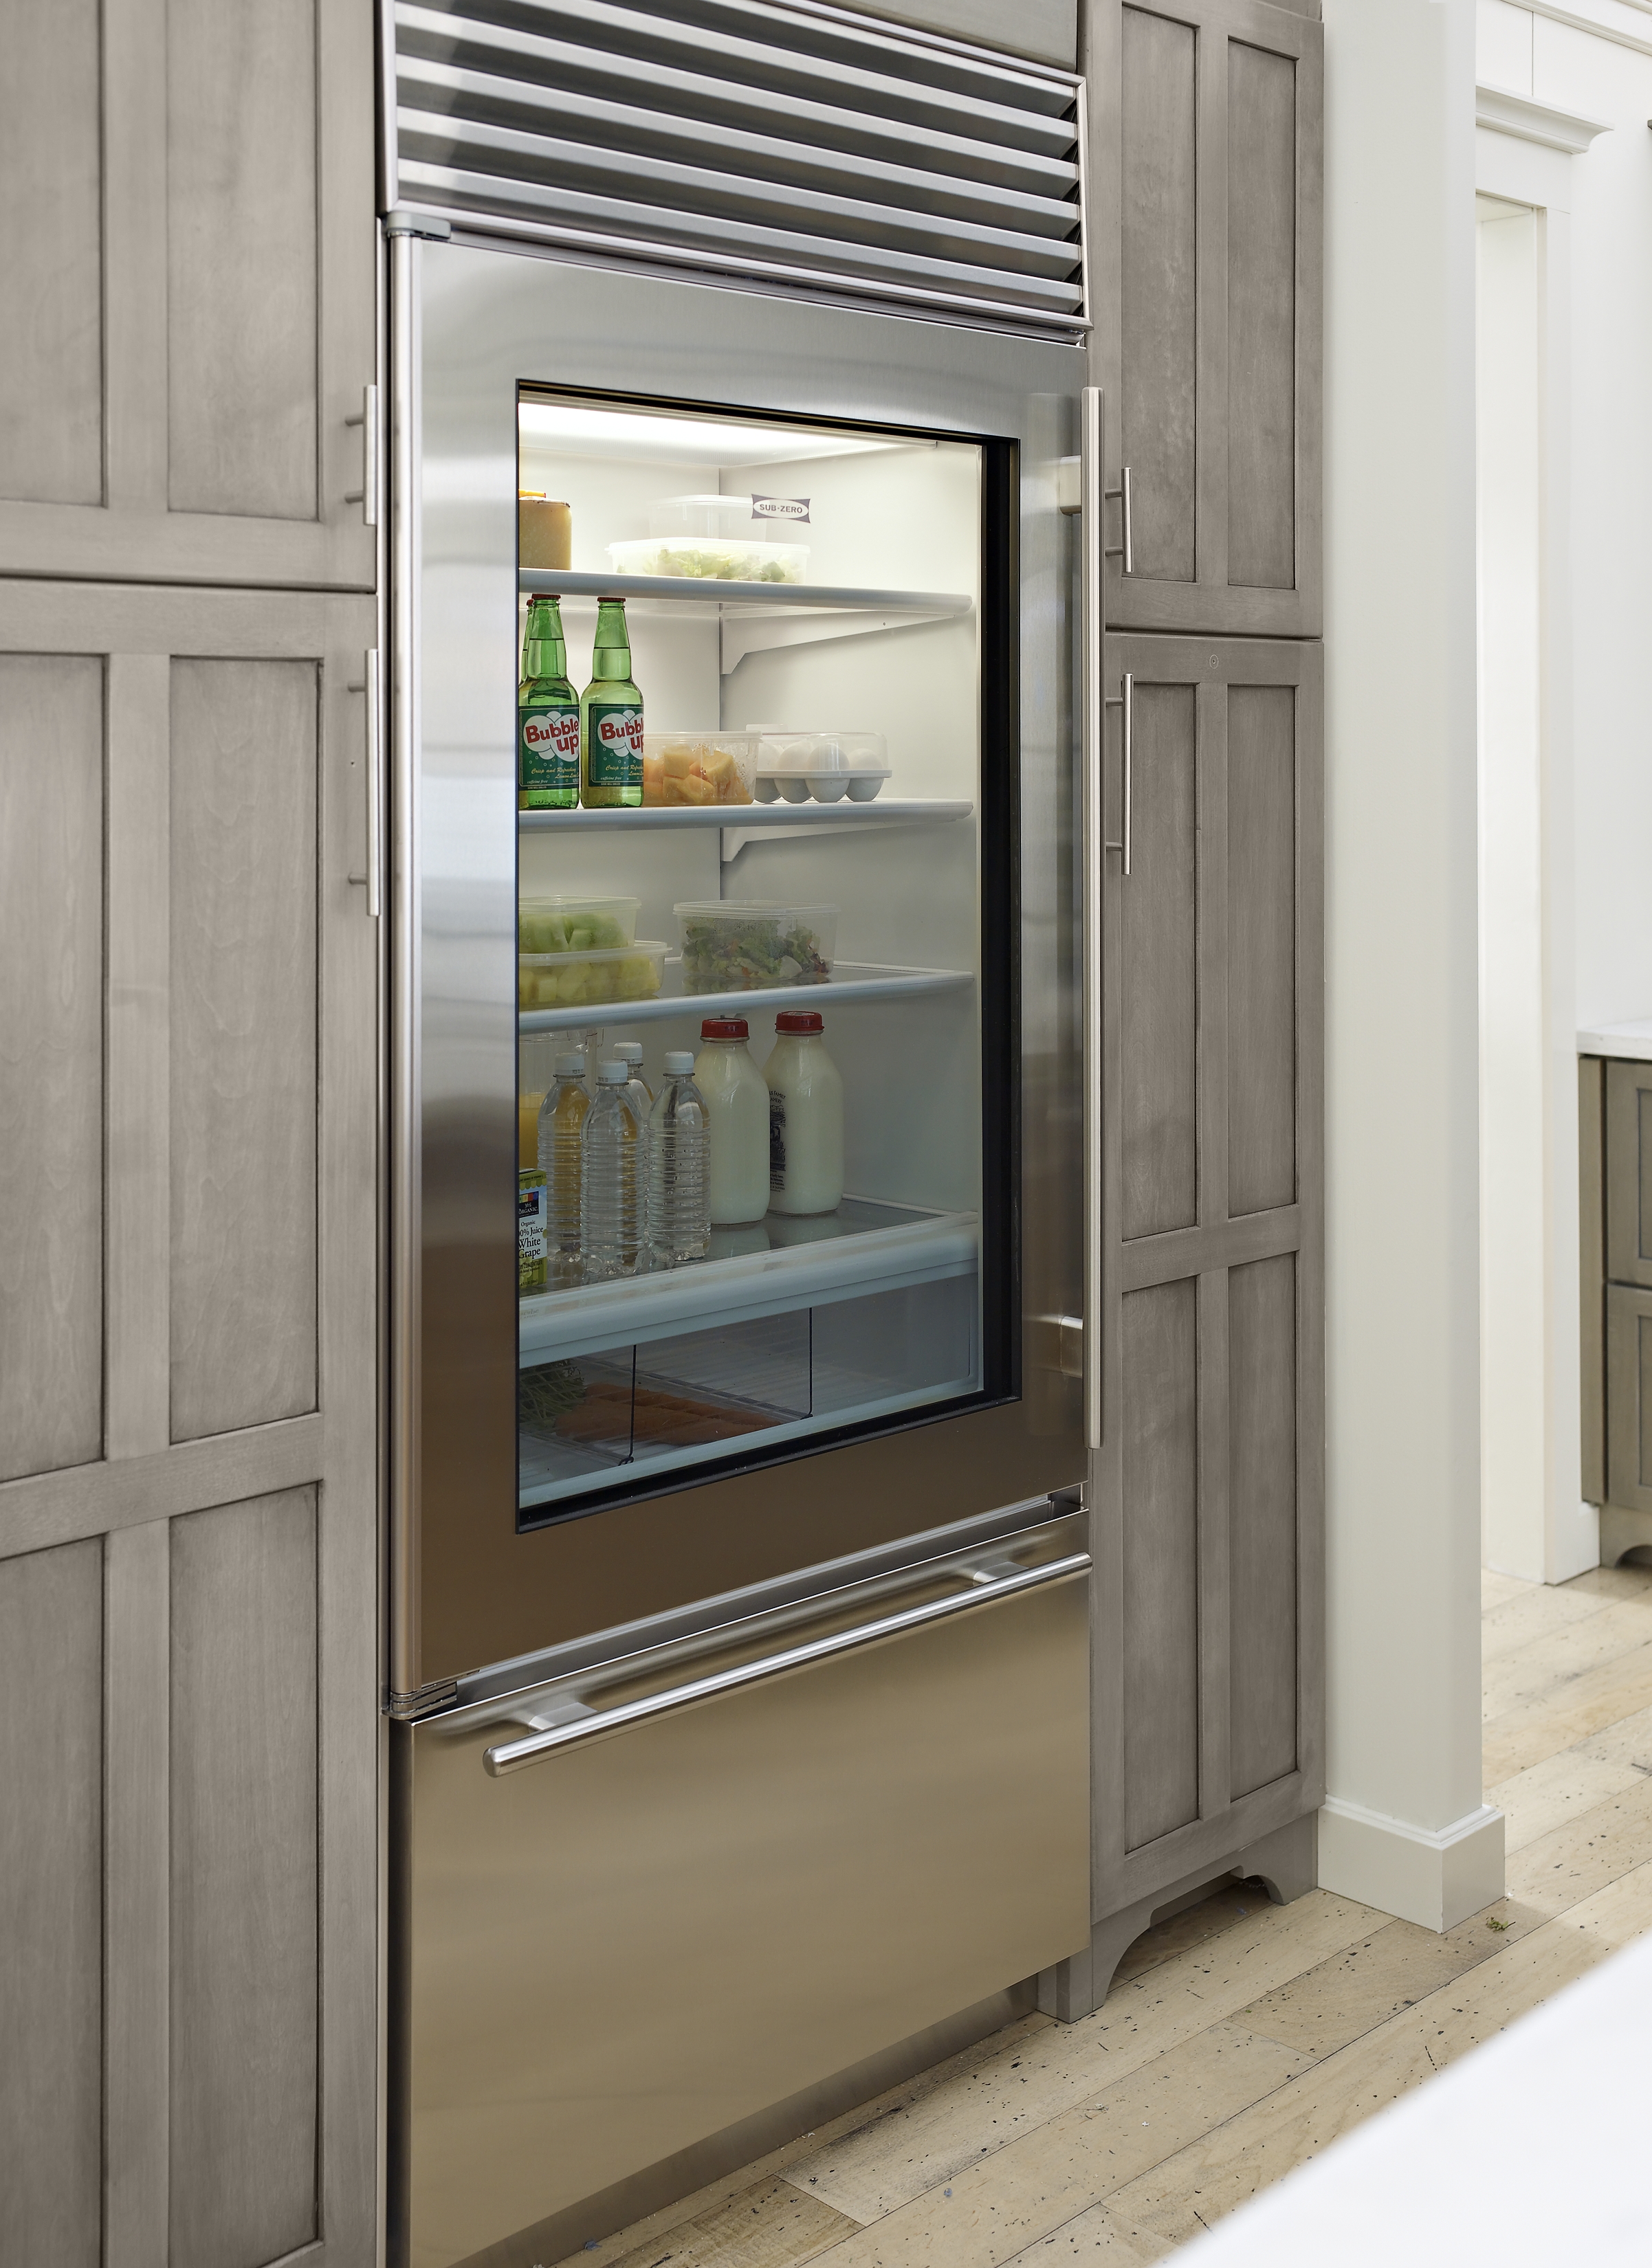 Stainless steel fridge fitted between wooden cabinetry along the kitchen wall